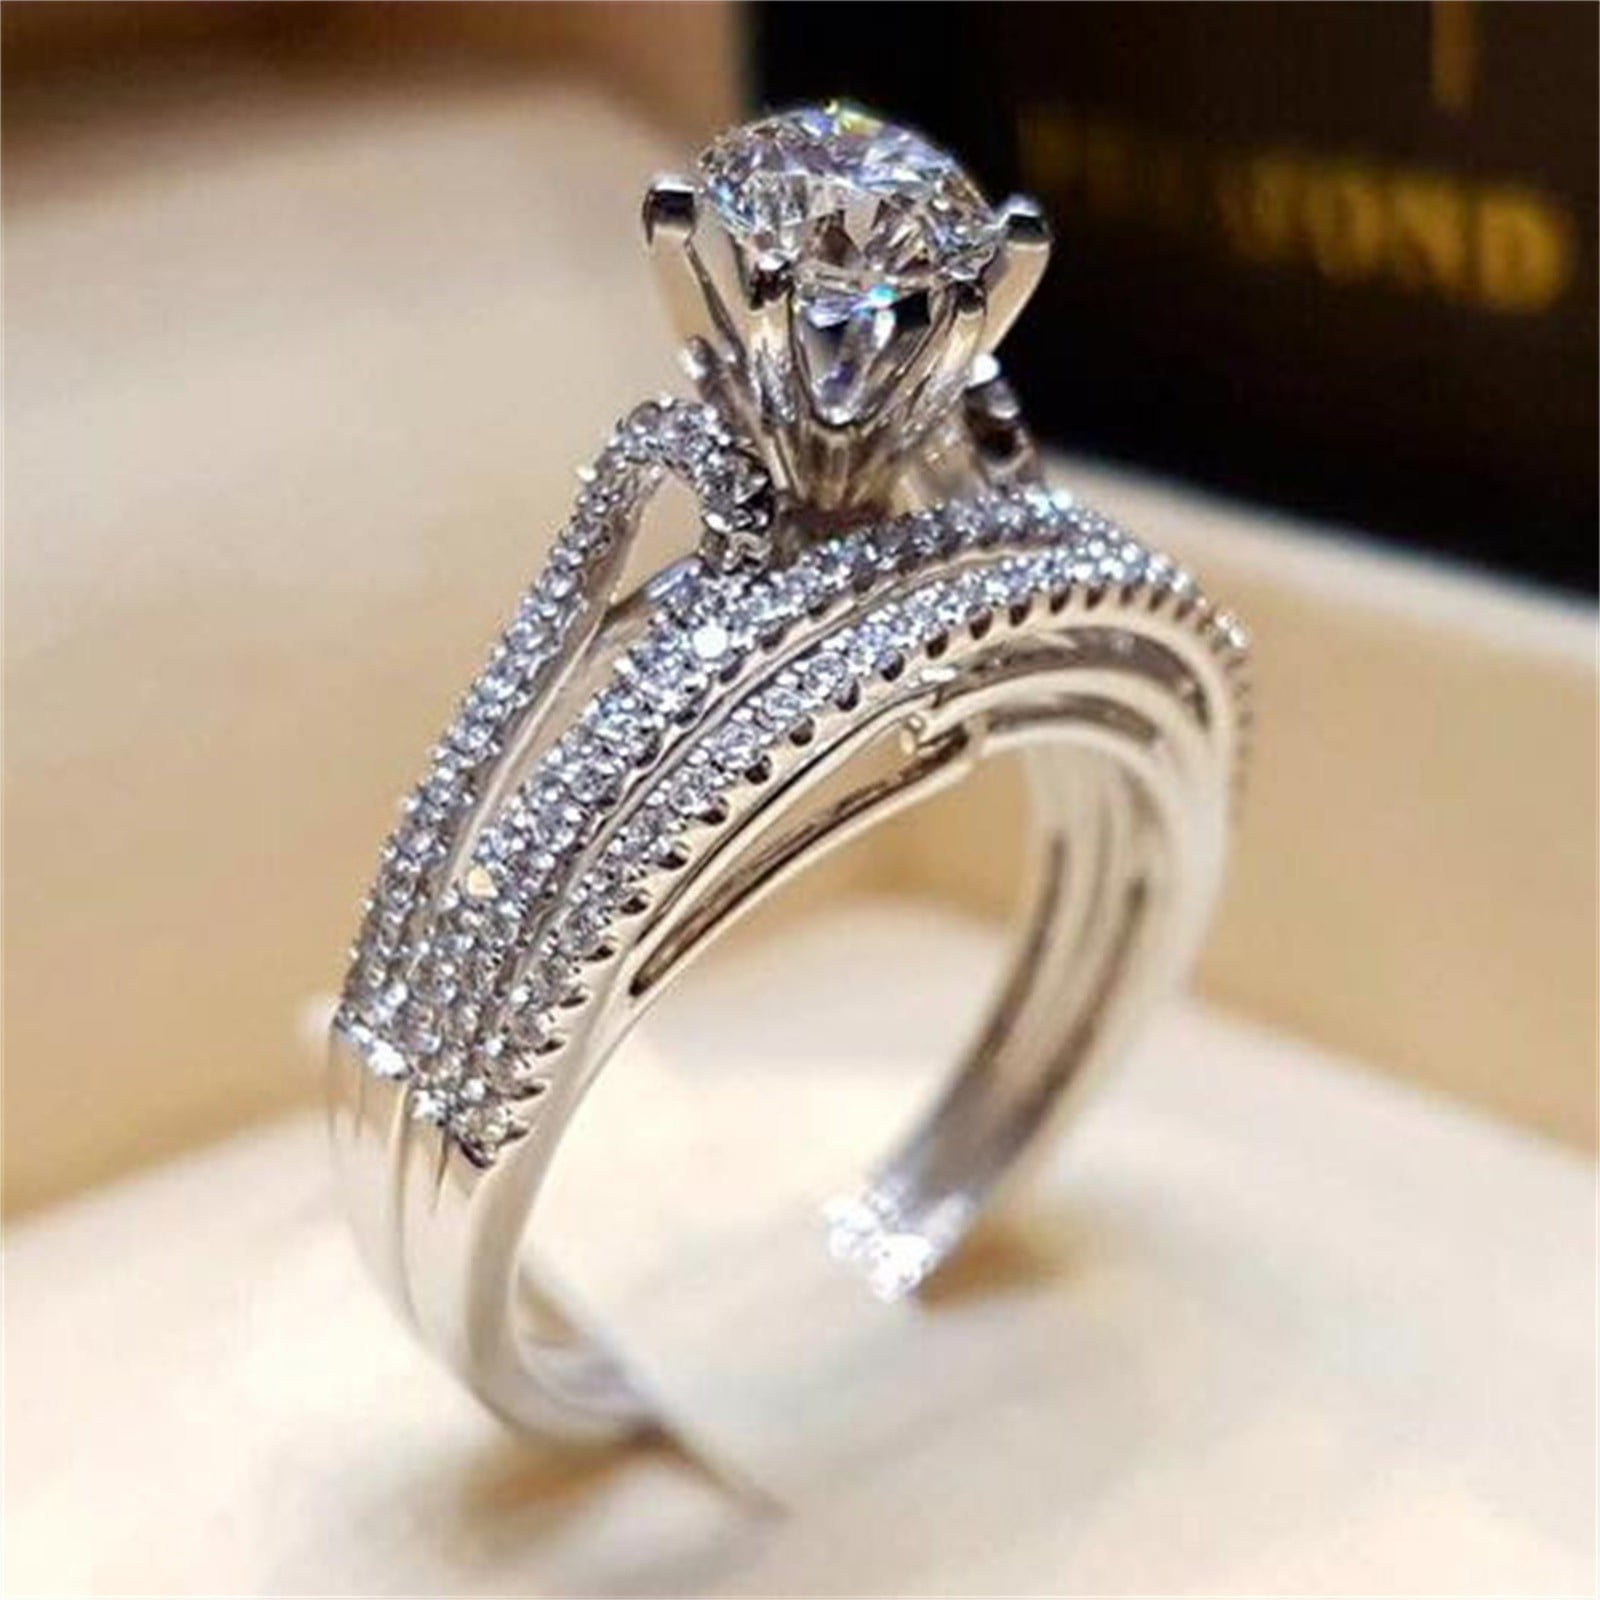 1.25 Carat Blue Diamond Engagement Ring, Unique Solitaire Vintage 14K White  Gold or Rose Gold Certified Handmade Galley Designs